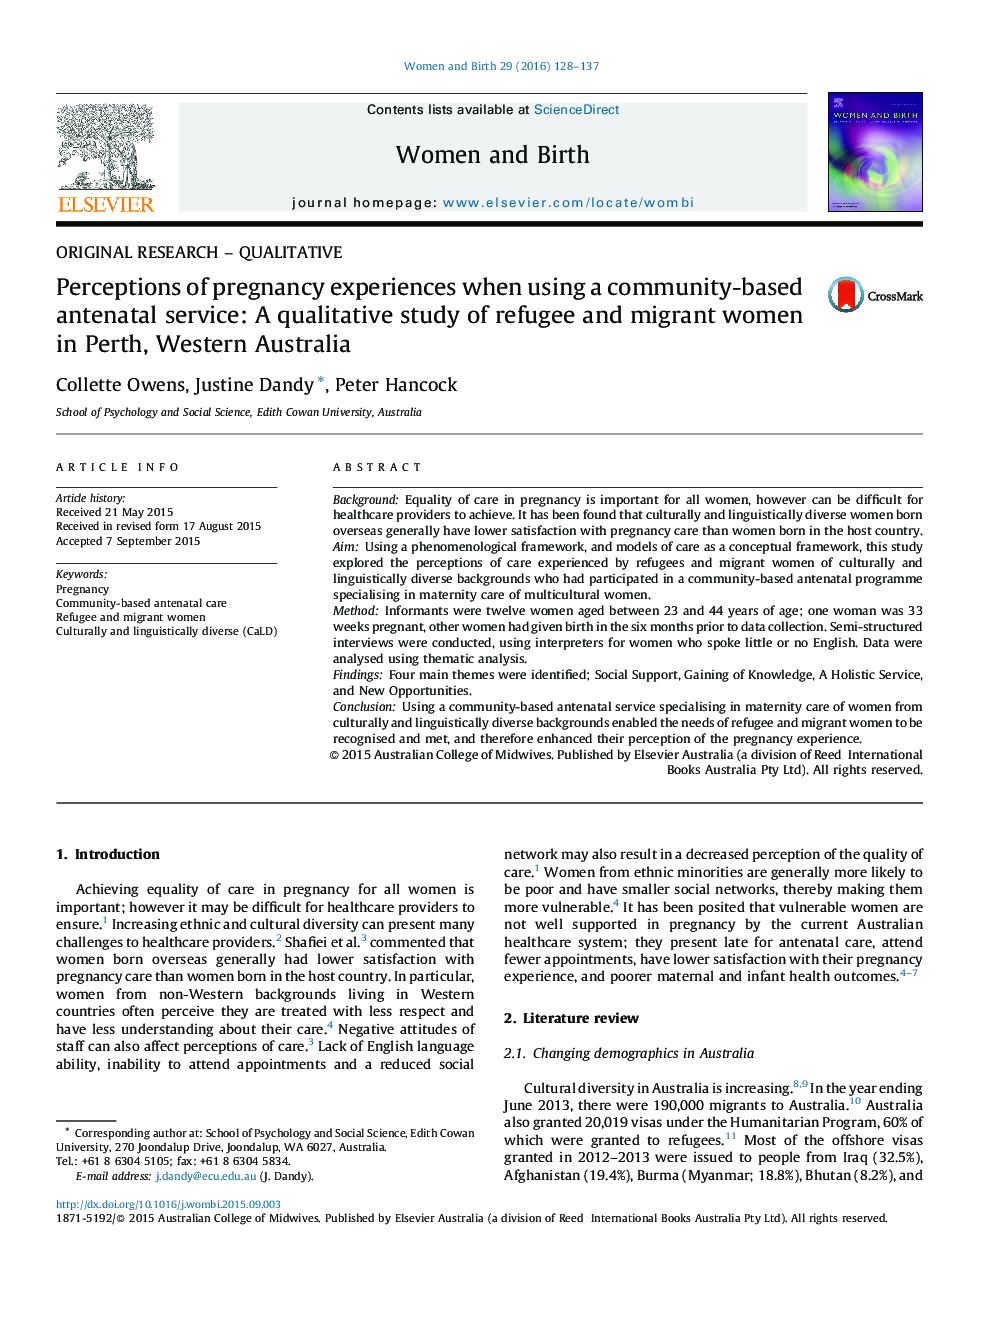 Perceptions of pregnancy experiences when using a community-based antenatal service: A qualitative study of refugee and migrant women in Perth, Western Australia